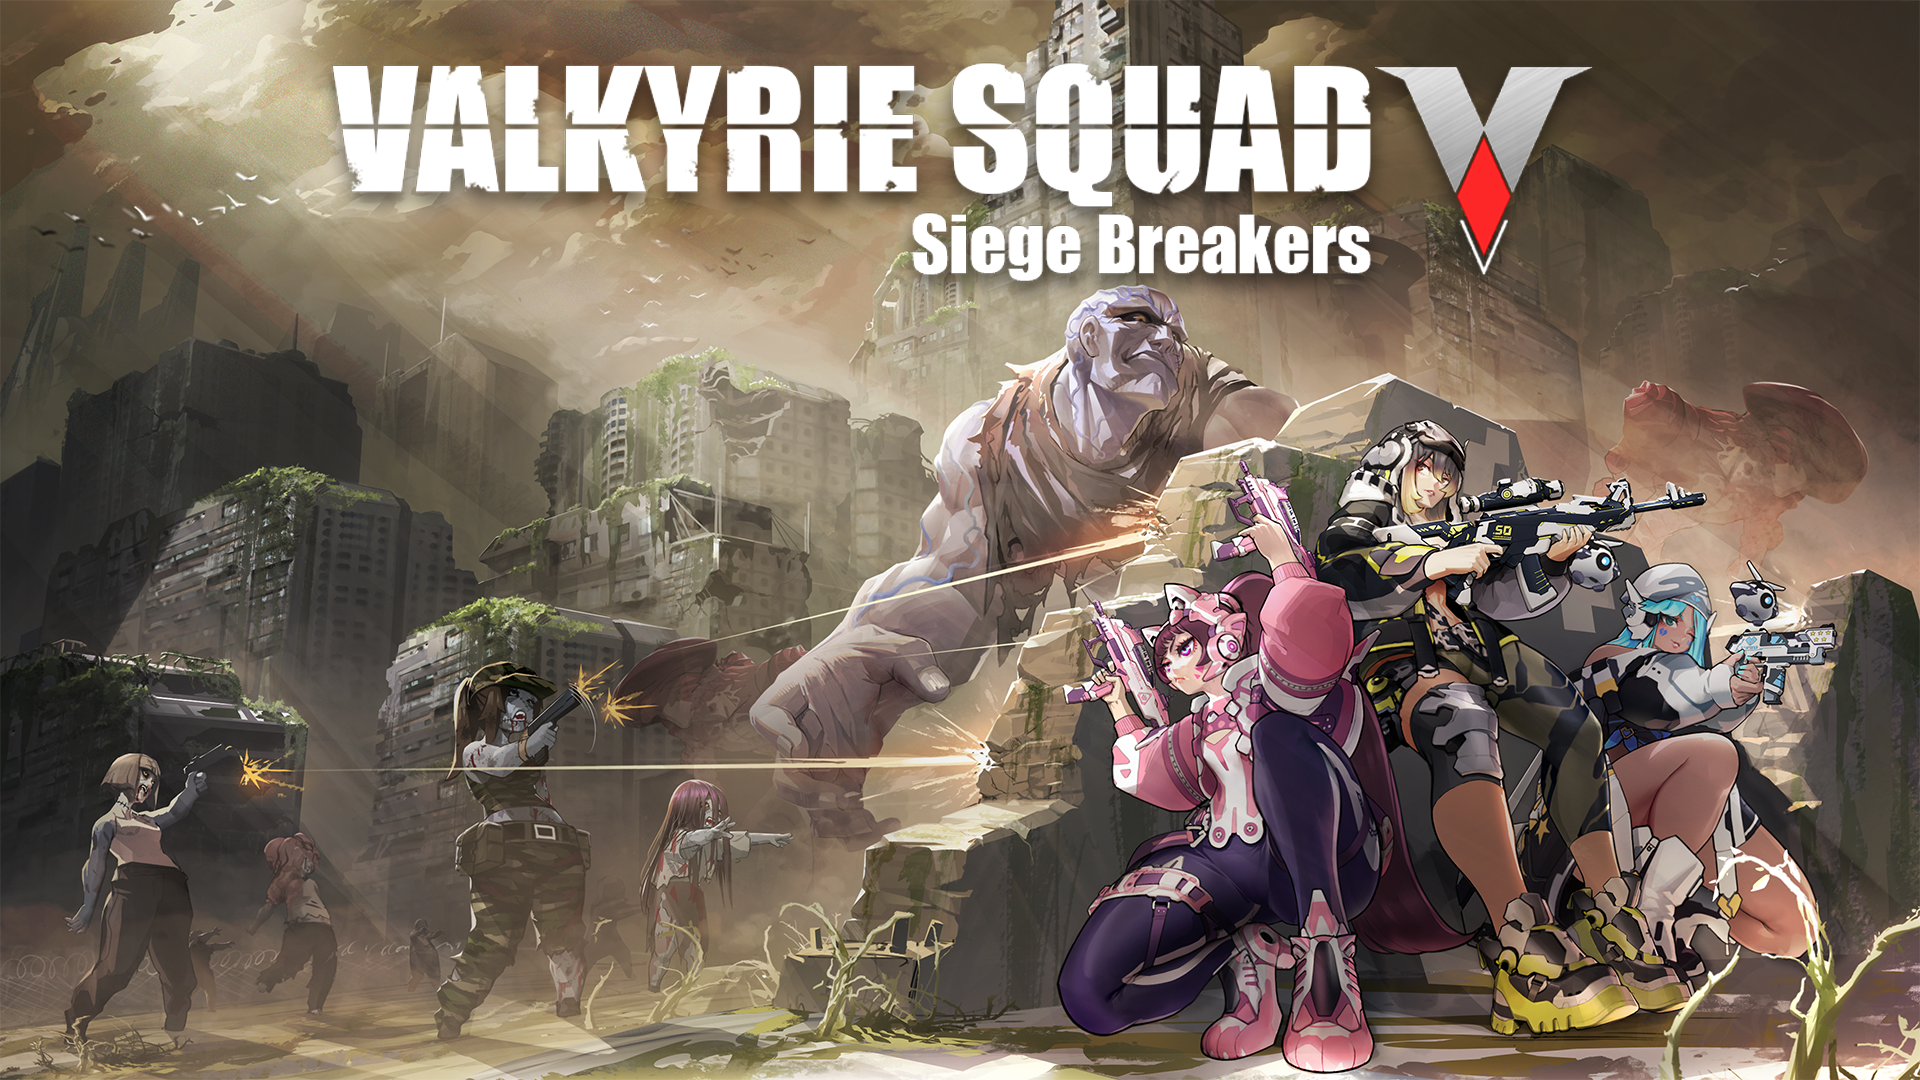 Valkyrie Squad: Siege Breakers